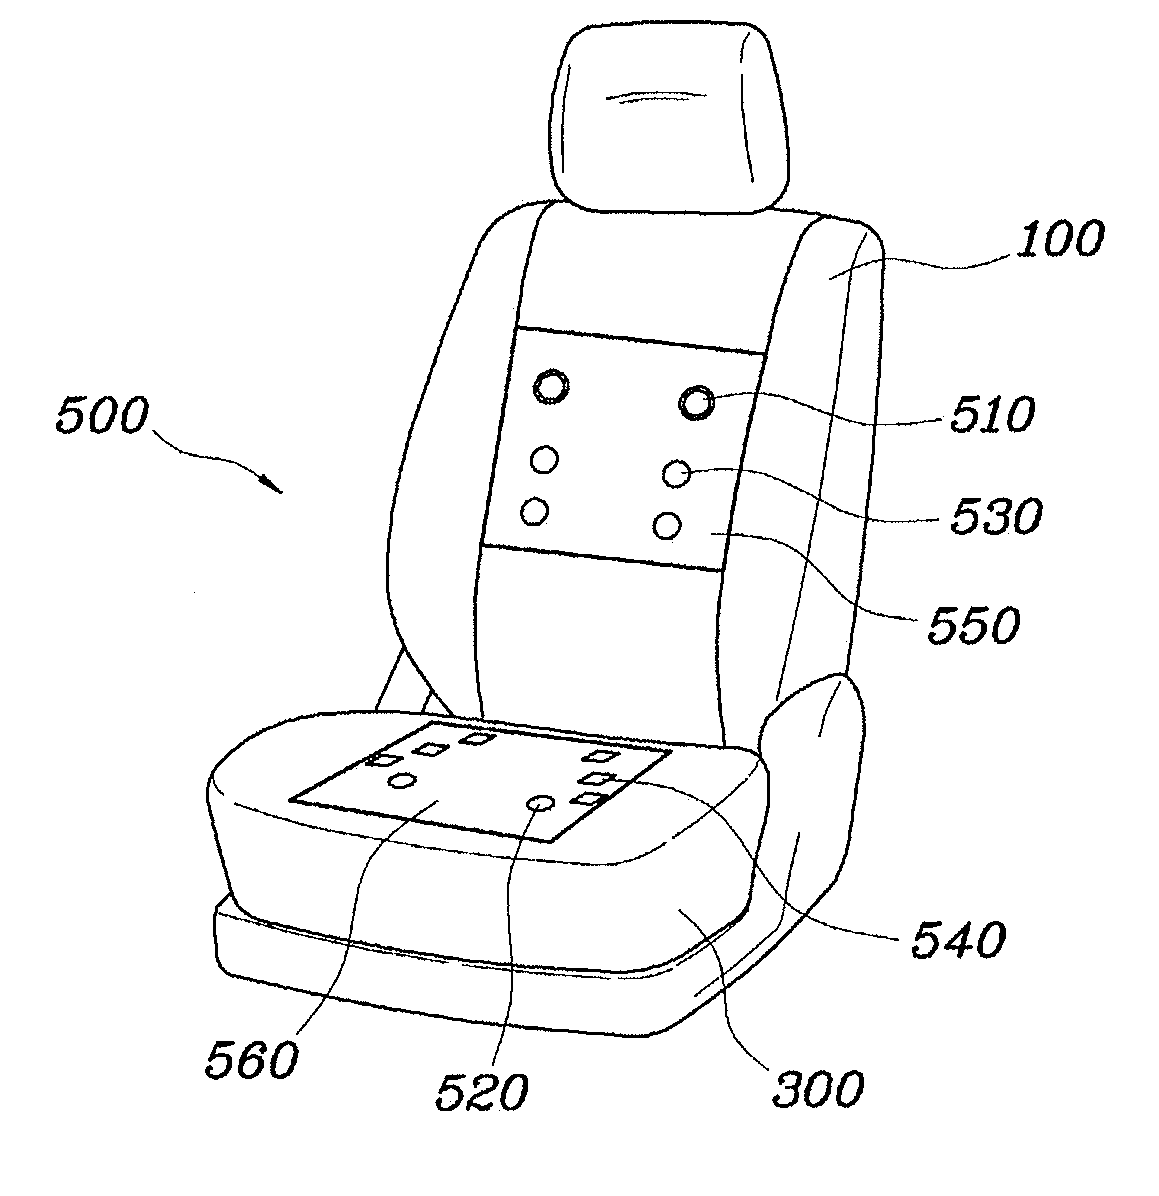 System and method for observing heart rate of passenger